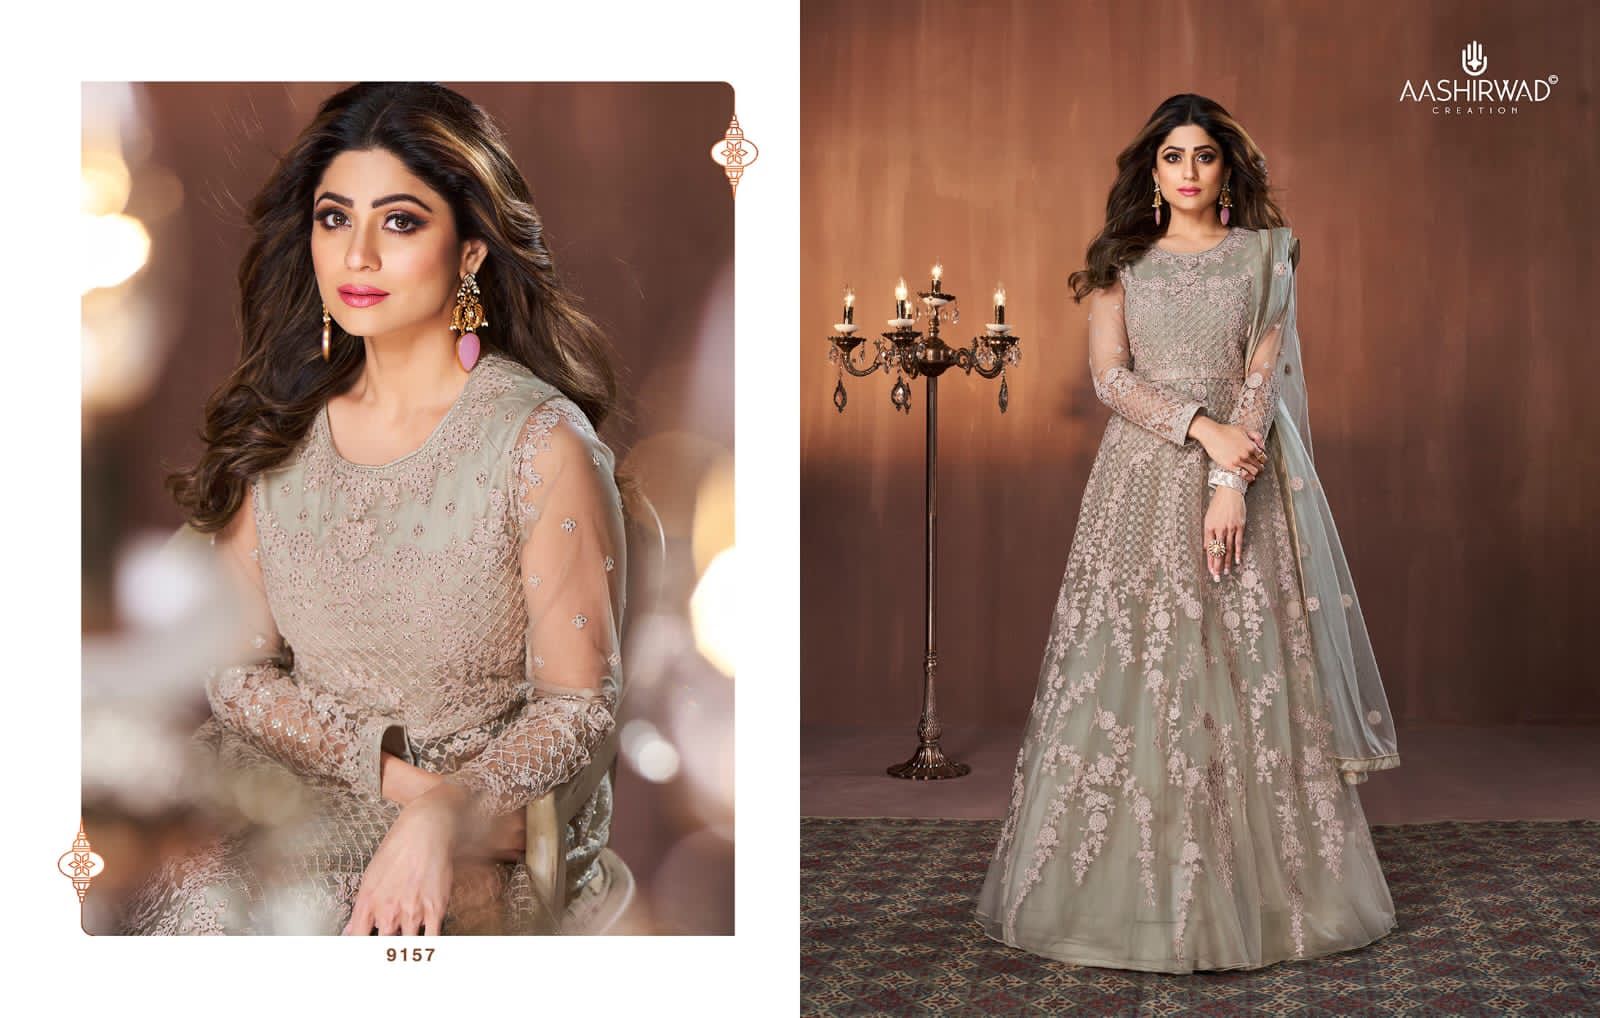 AASHIRWAD CREATION PRESENT JASLEEN READYMADE GOWN STYLE DESIGNER SUITS IN  WHOLESALE RATE IN SURAT - SAIDHARANX